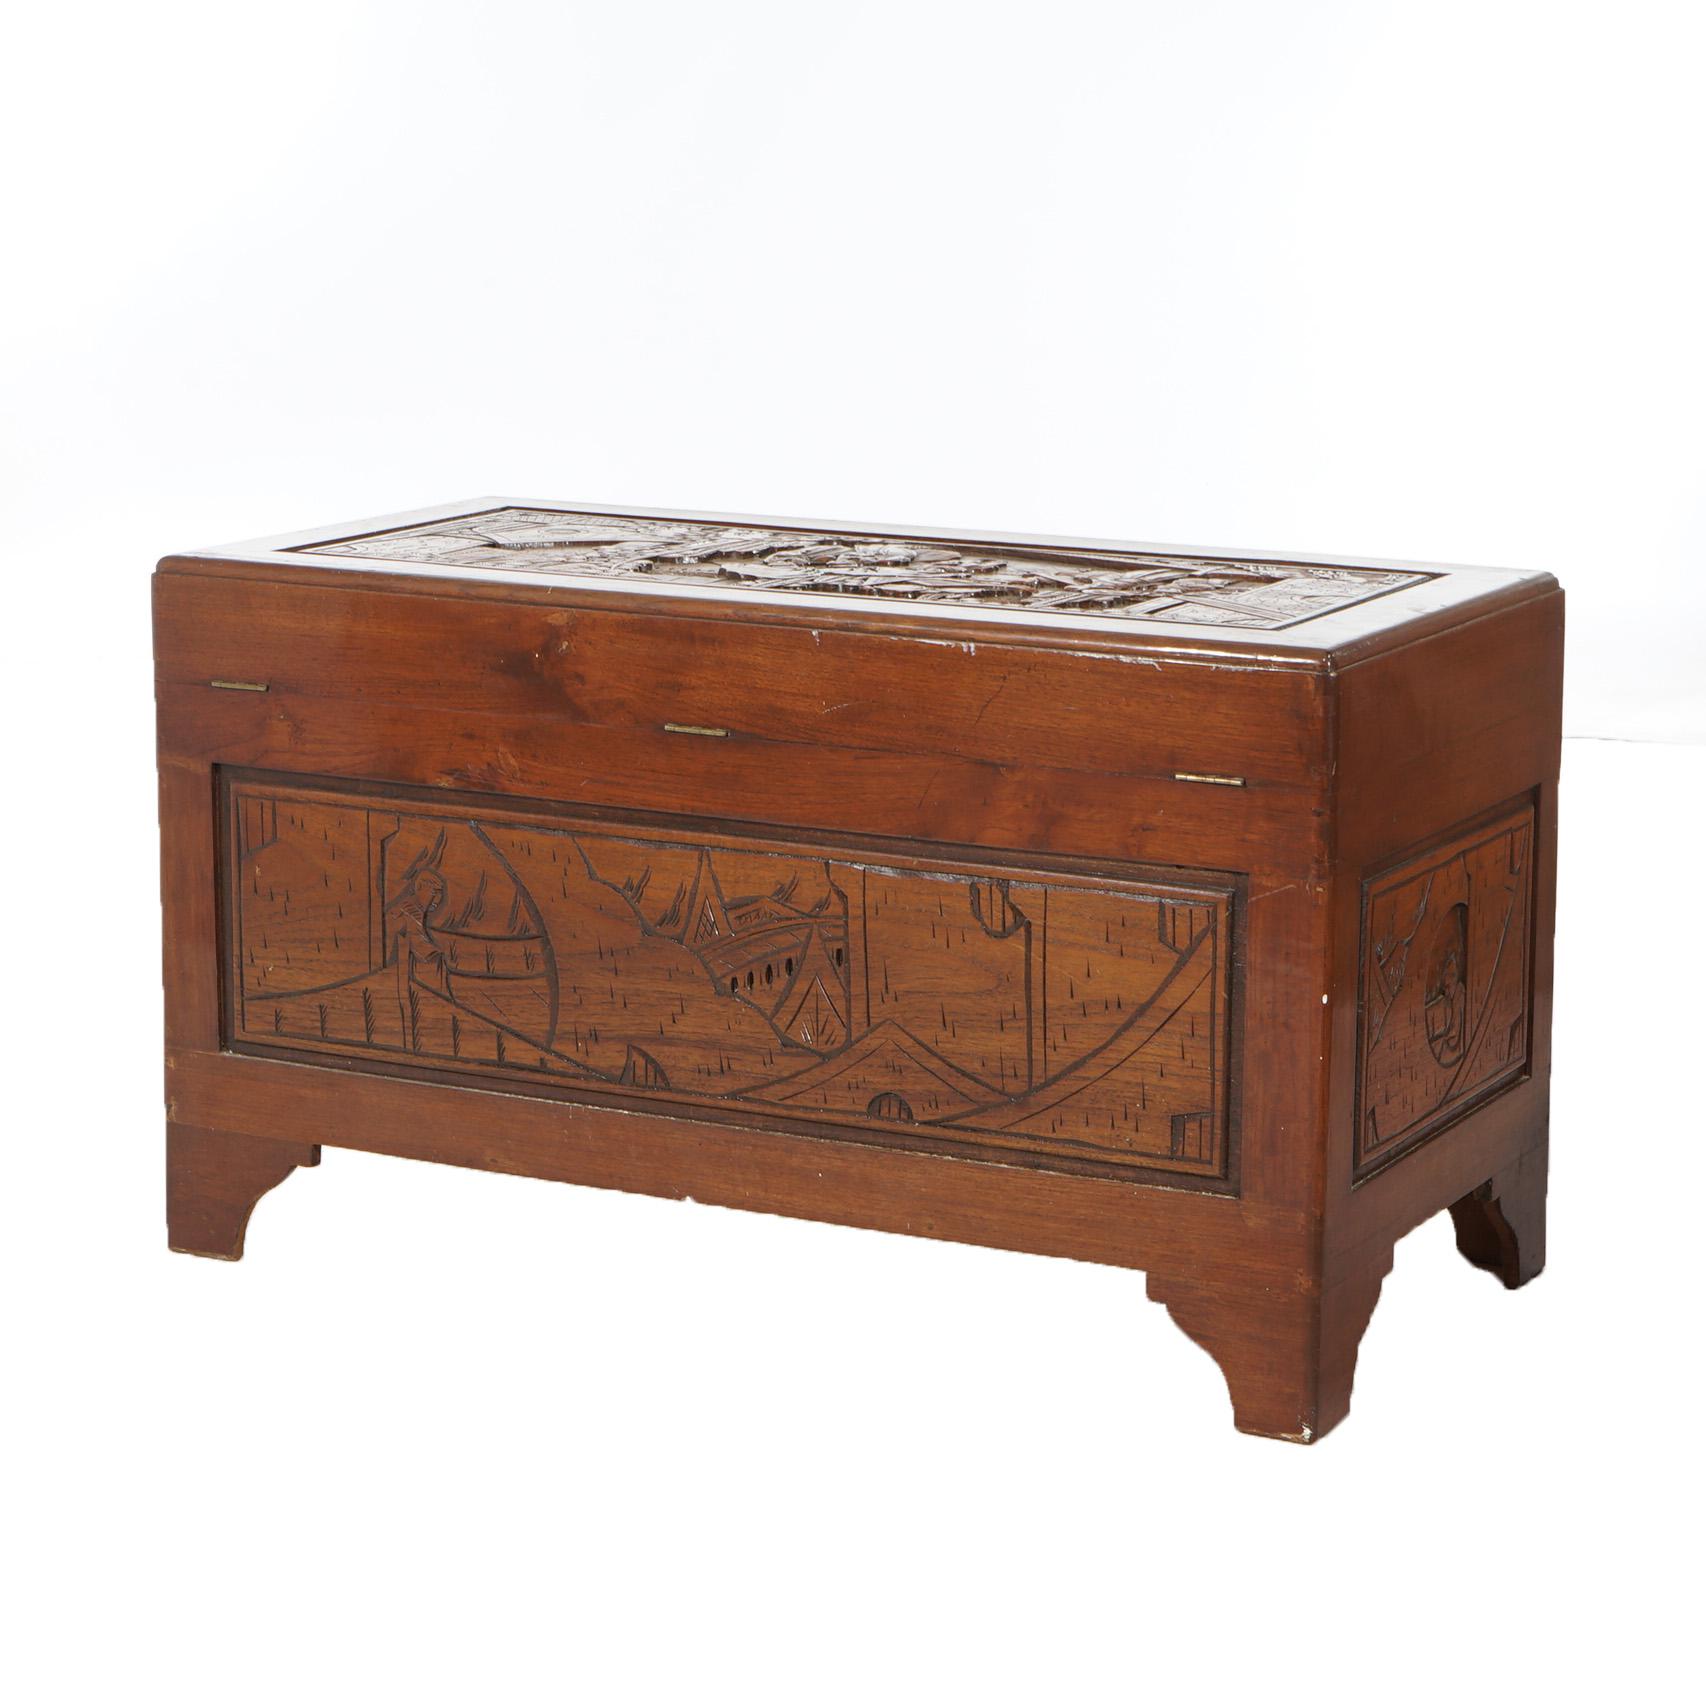 Chinese Carved Hardwood Figural Blanket Chest with Street Scene in Relief 20thC For Sale 6